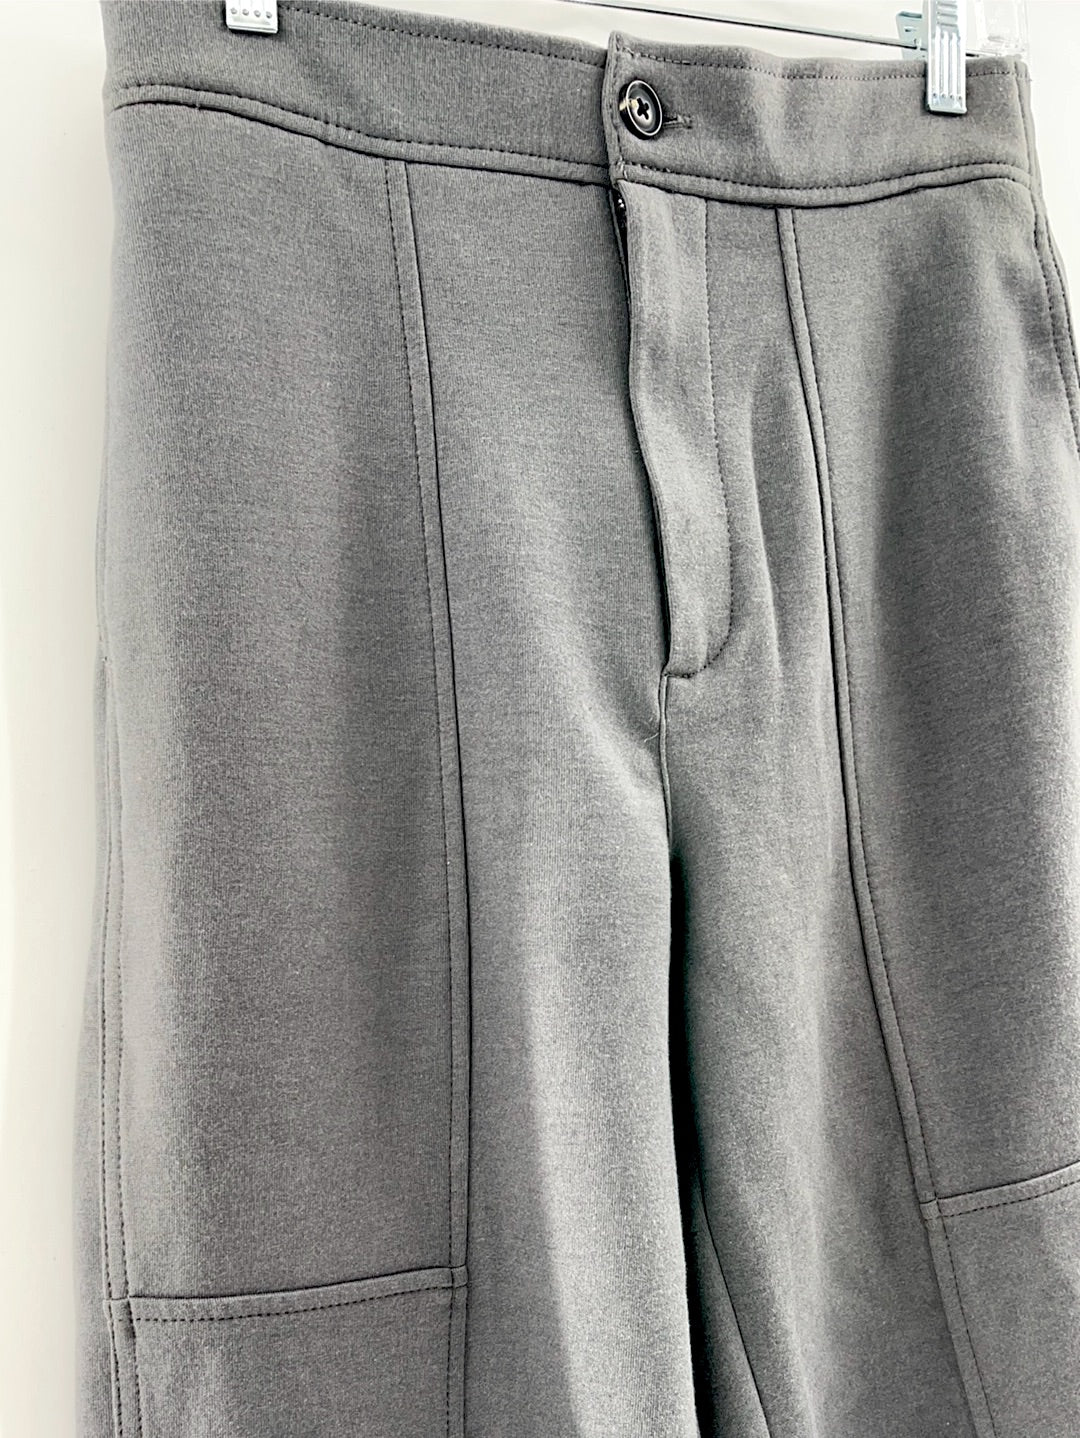 Urban Outfitters Gray Sweatpants Trousers (Size M)